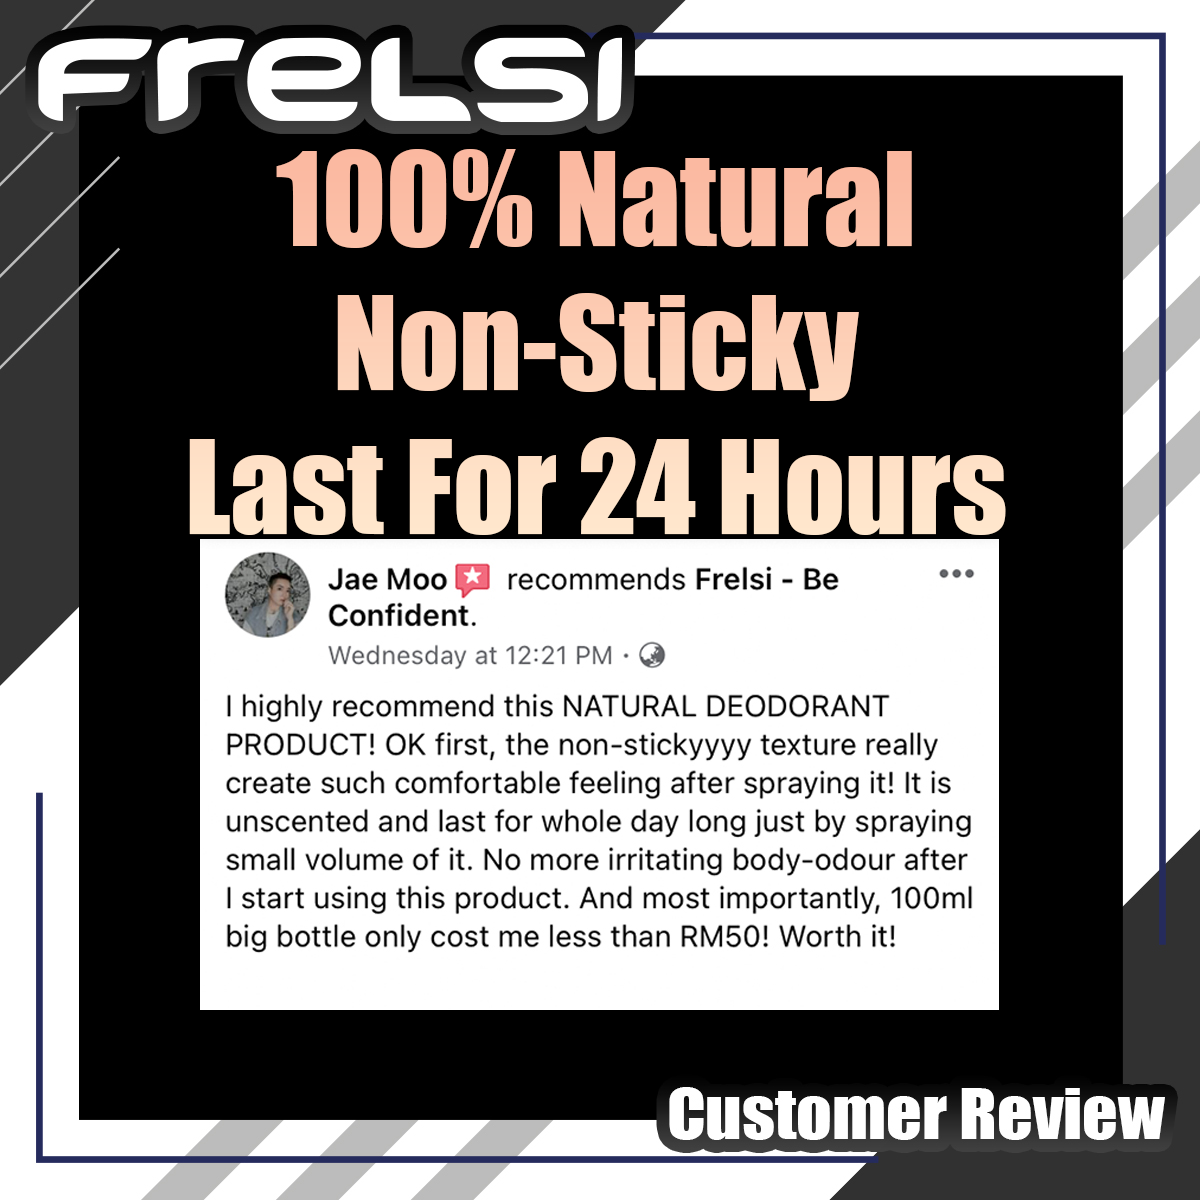 Frelsi Customer Review - 100% Natural non sticky last for 24 hours